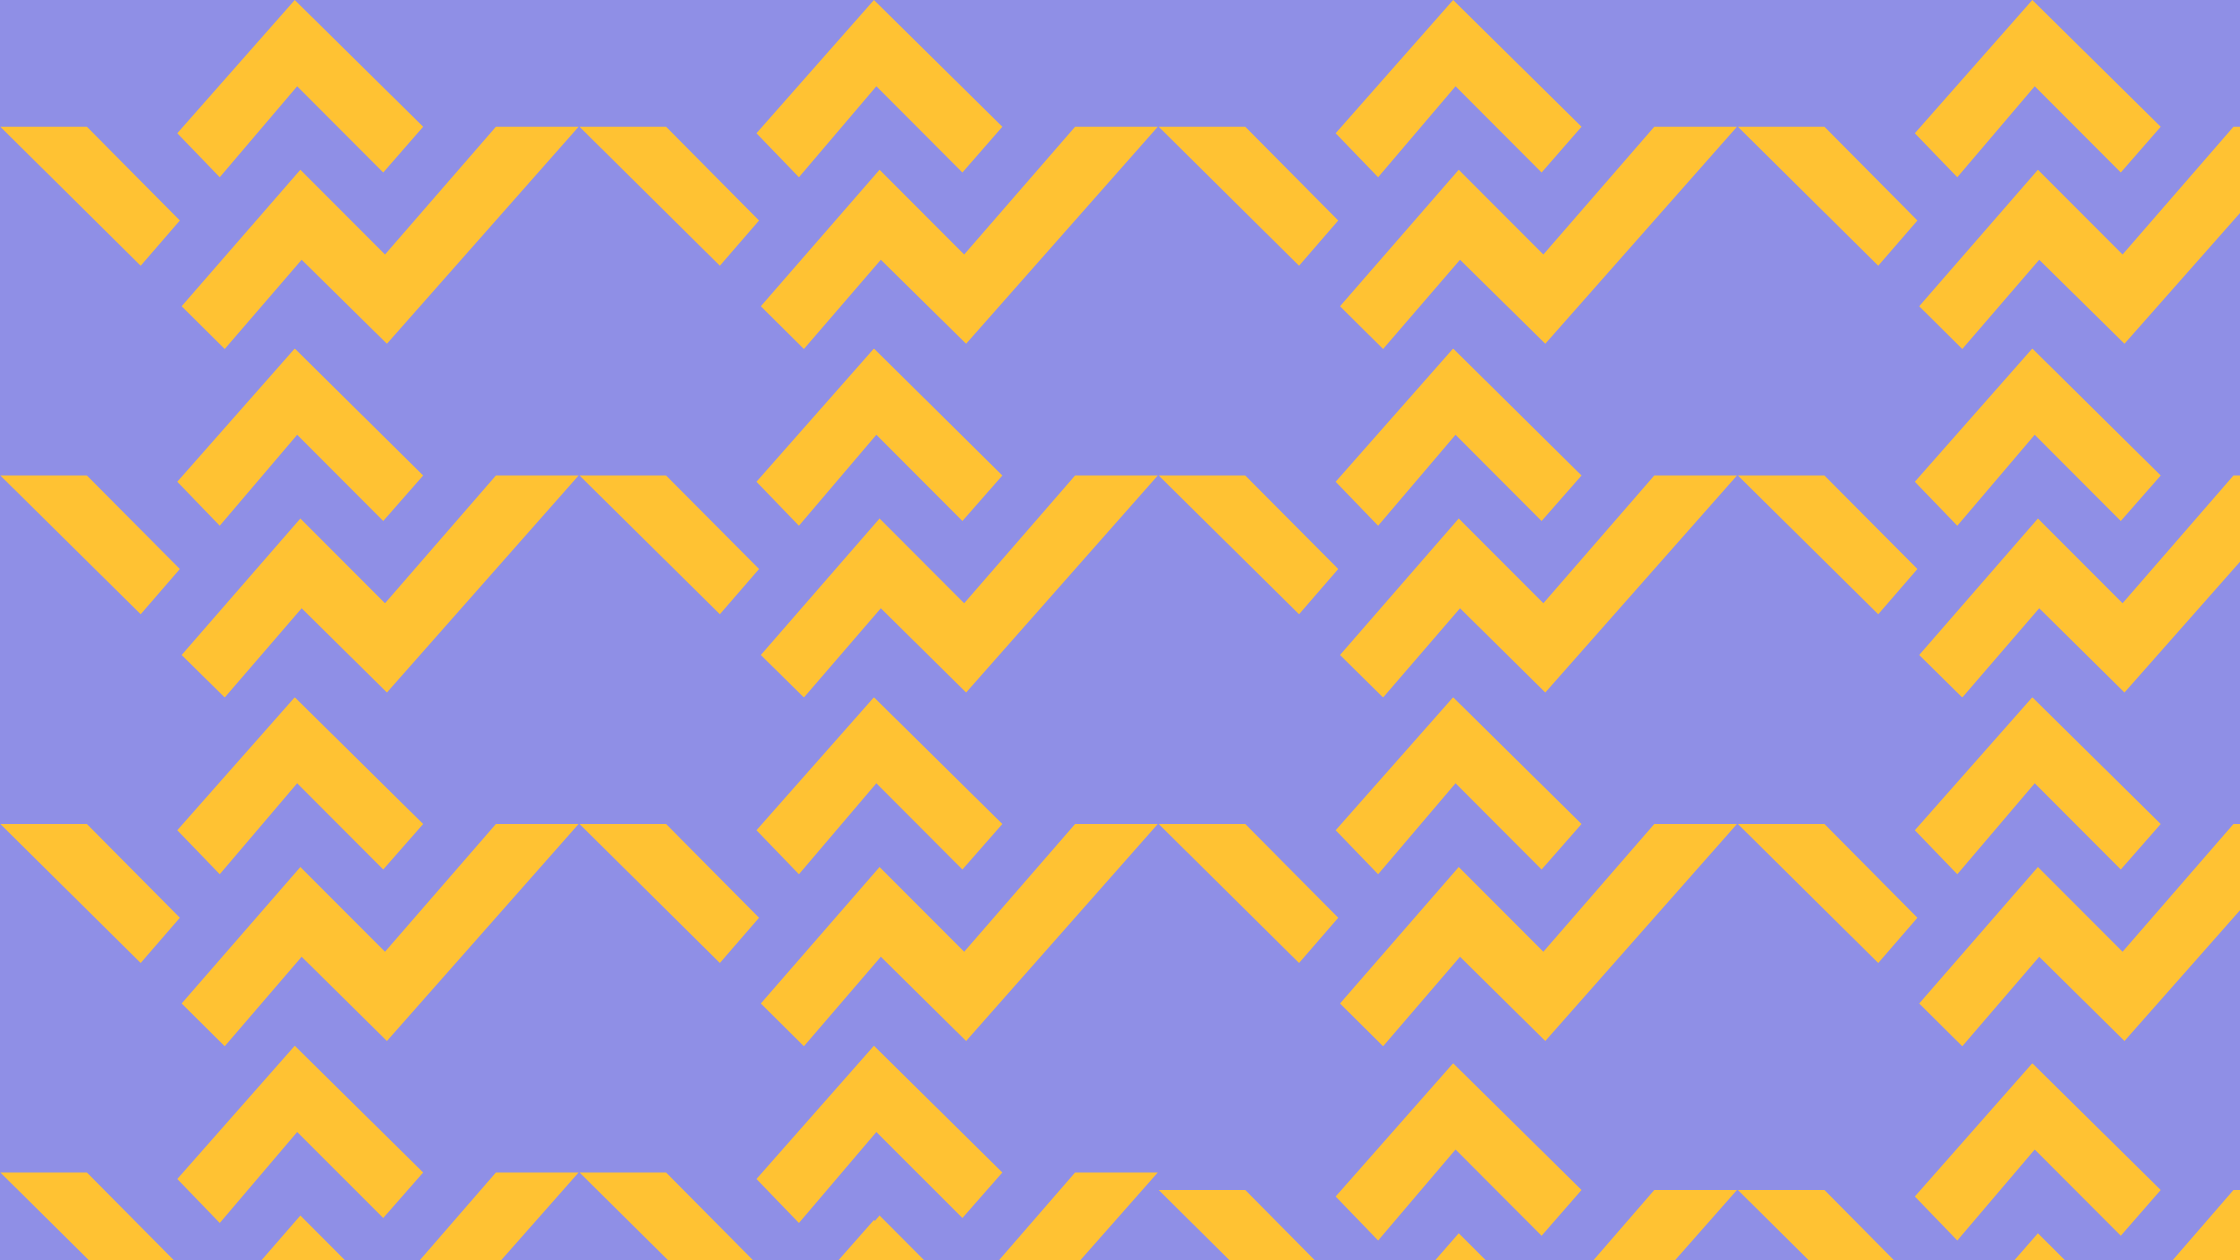 An abstract logo in a repeating pattern